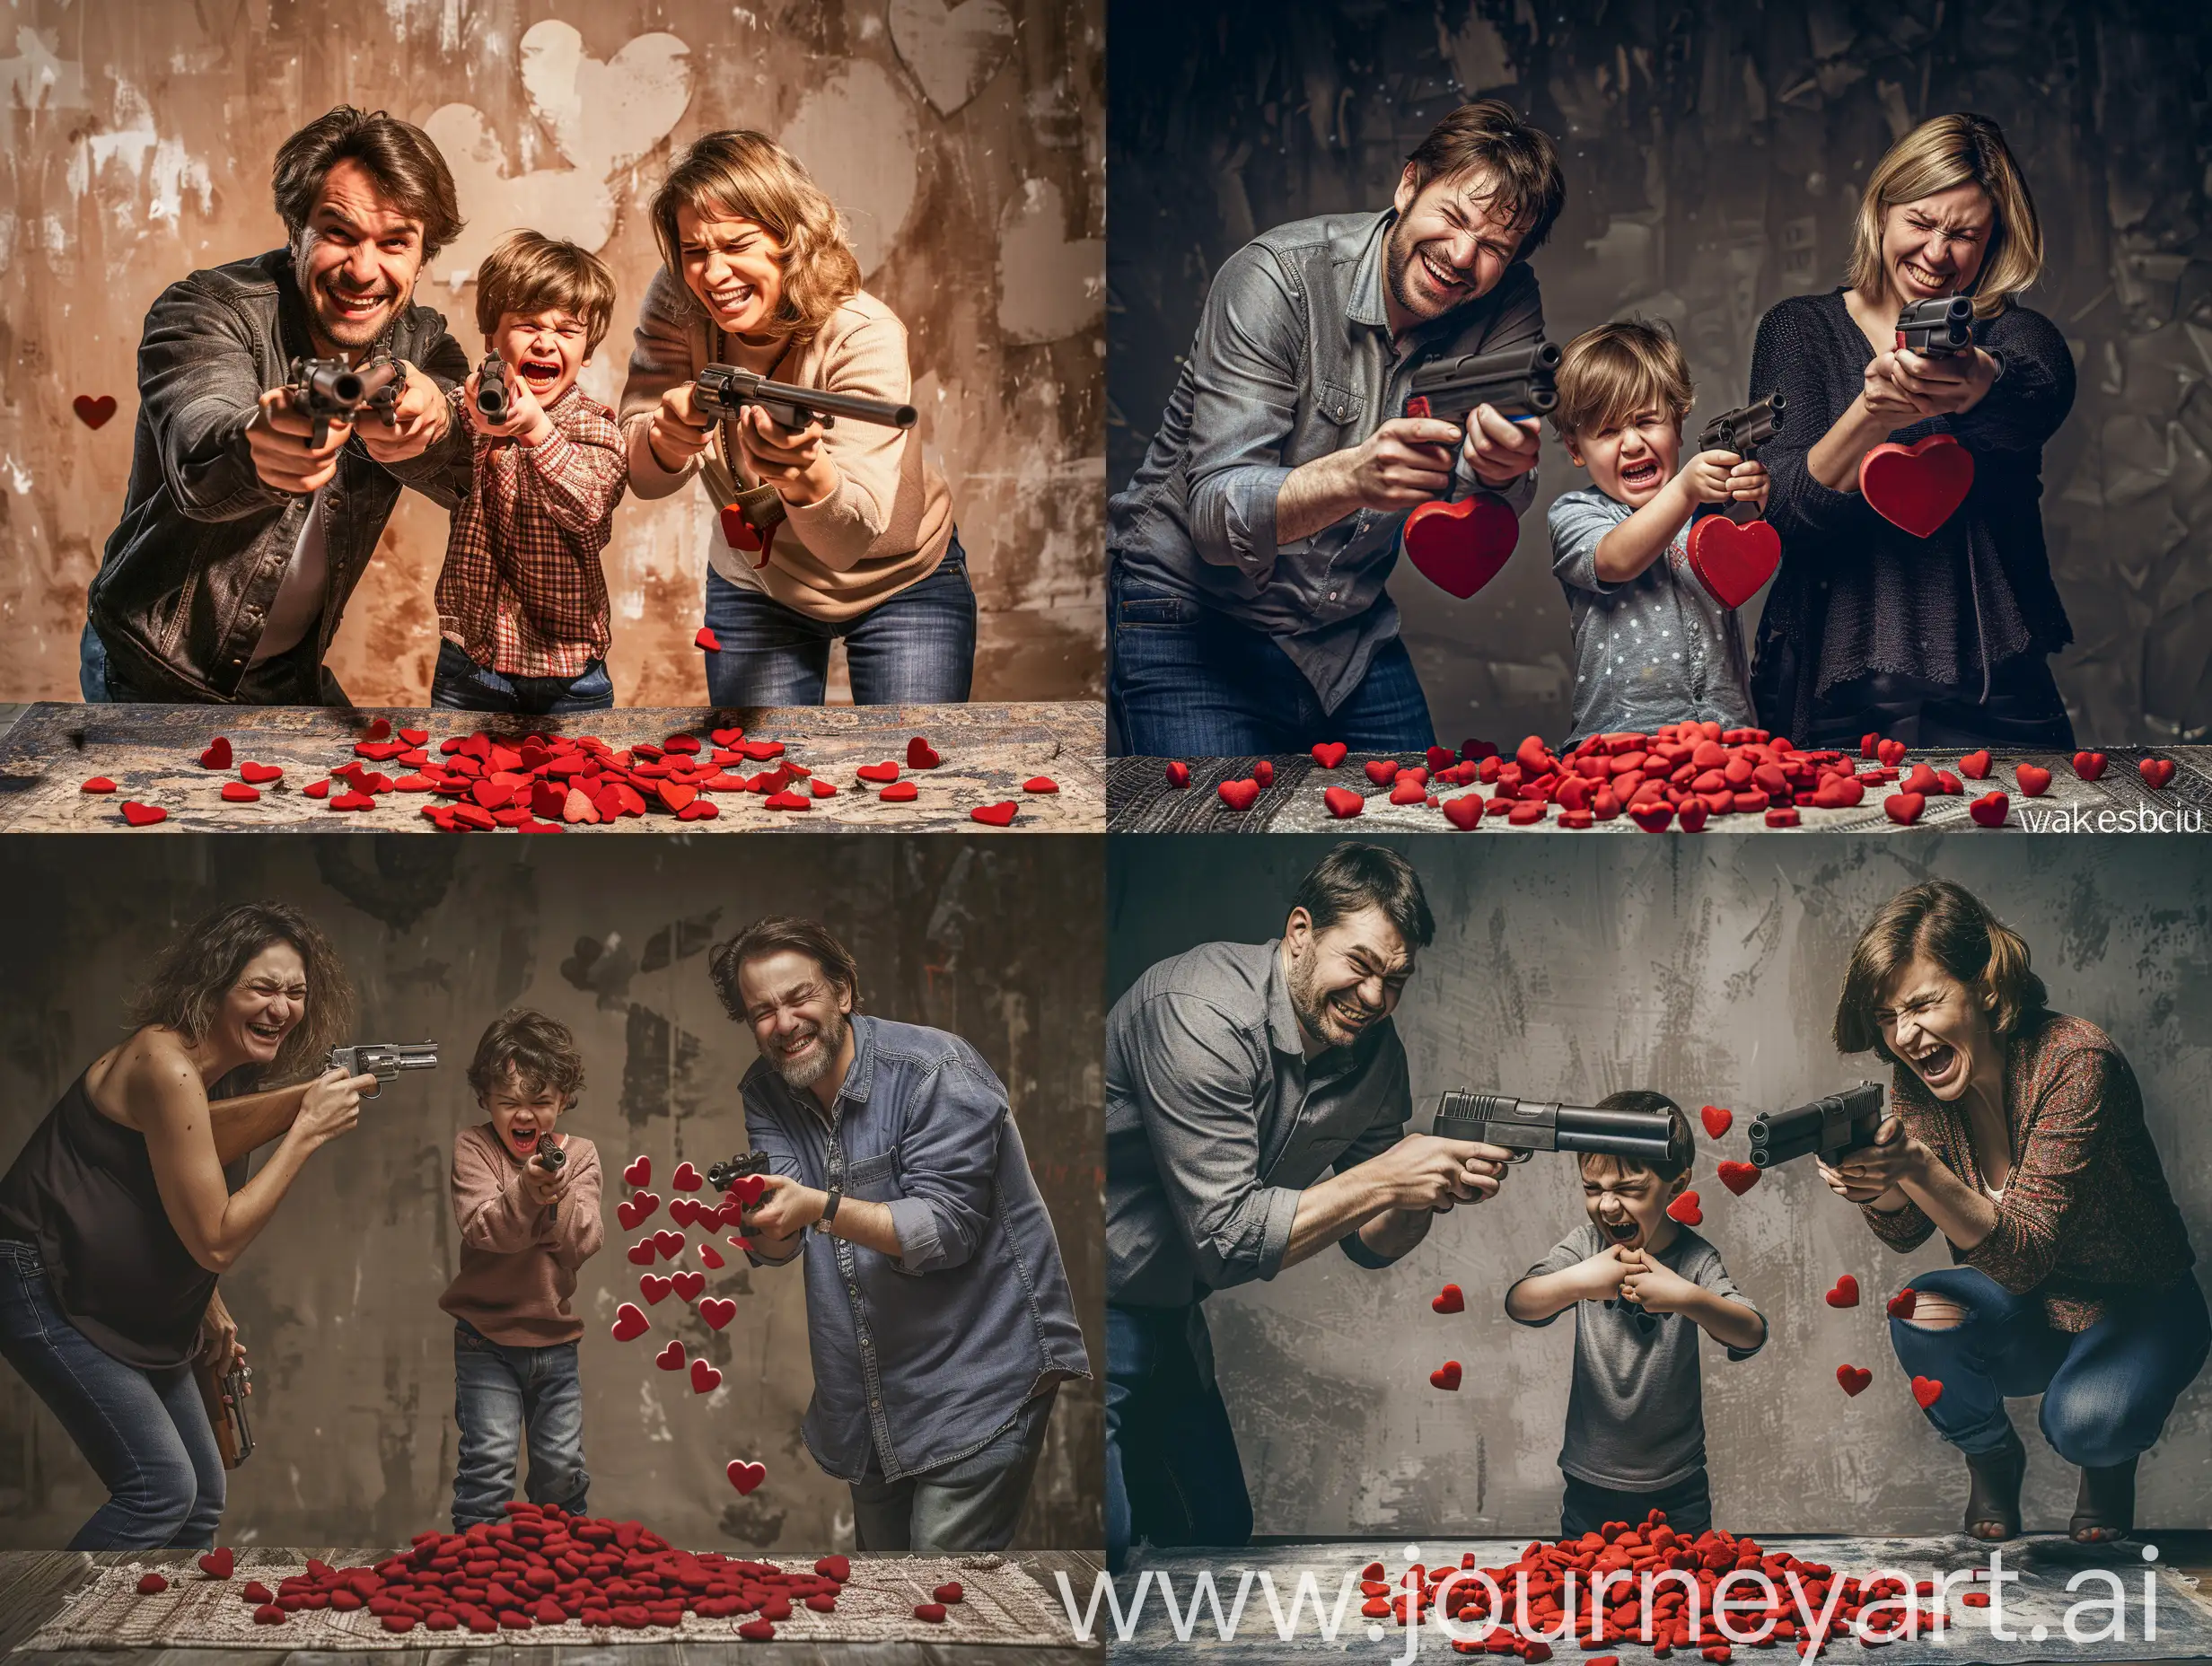 Sinister-Middleaged-Couple-Shooting-Hearts-at-Crying-Child